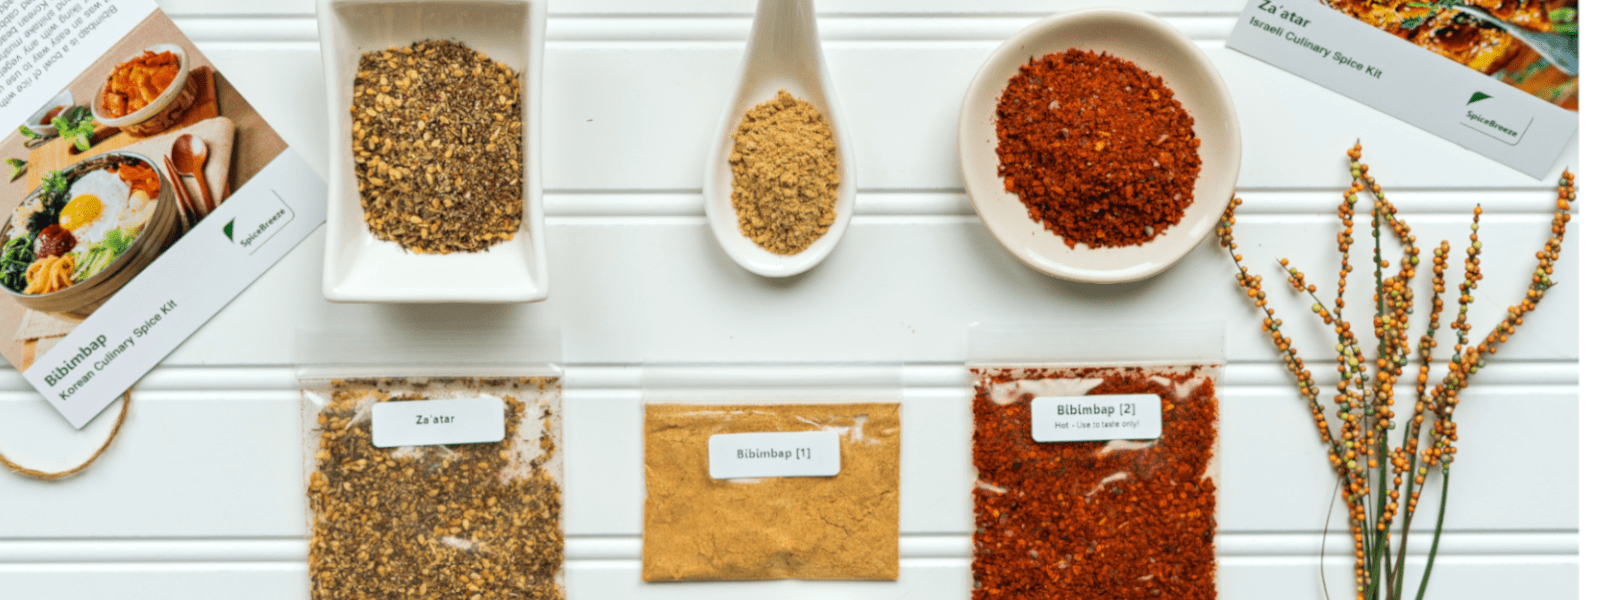 Monthly Culinary Spice Box